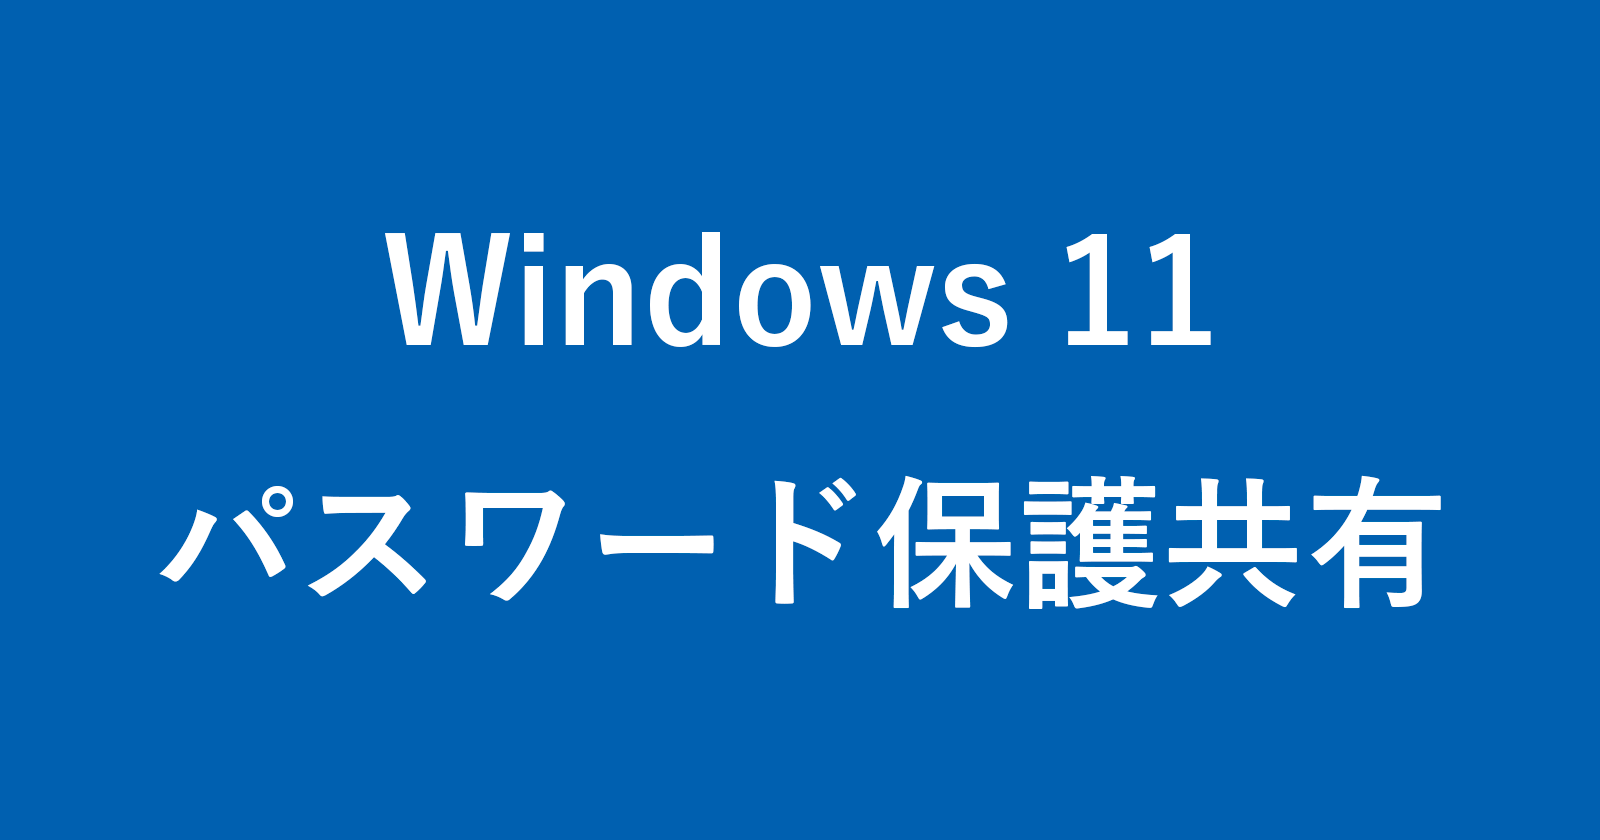 windows 11 password protected sharing